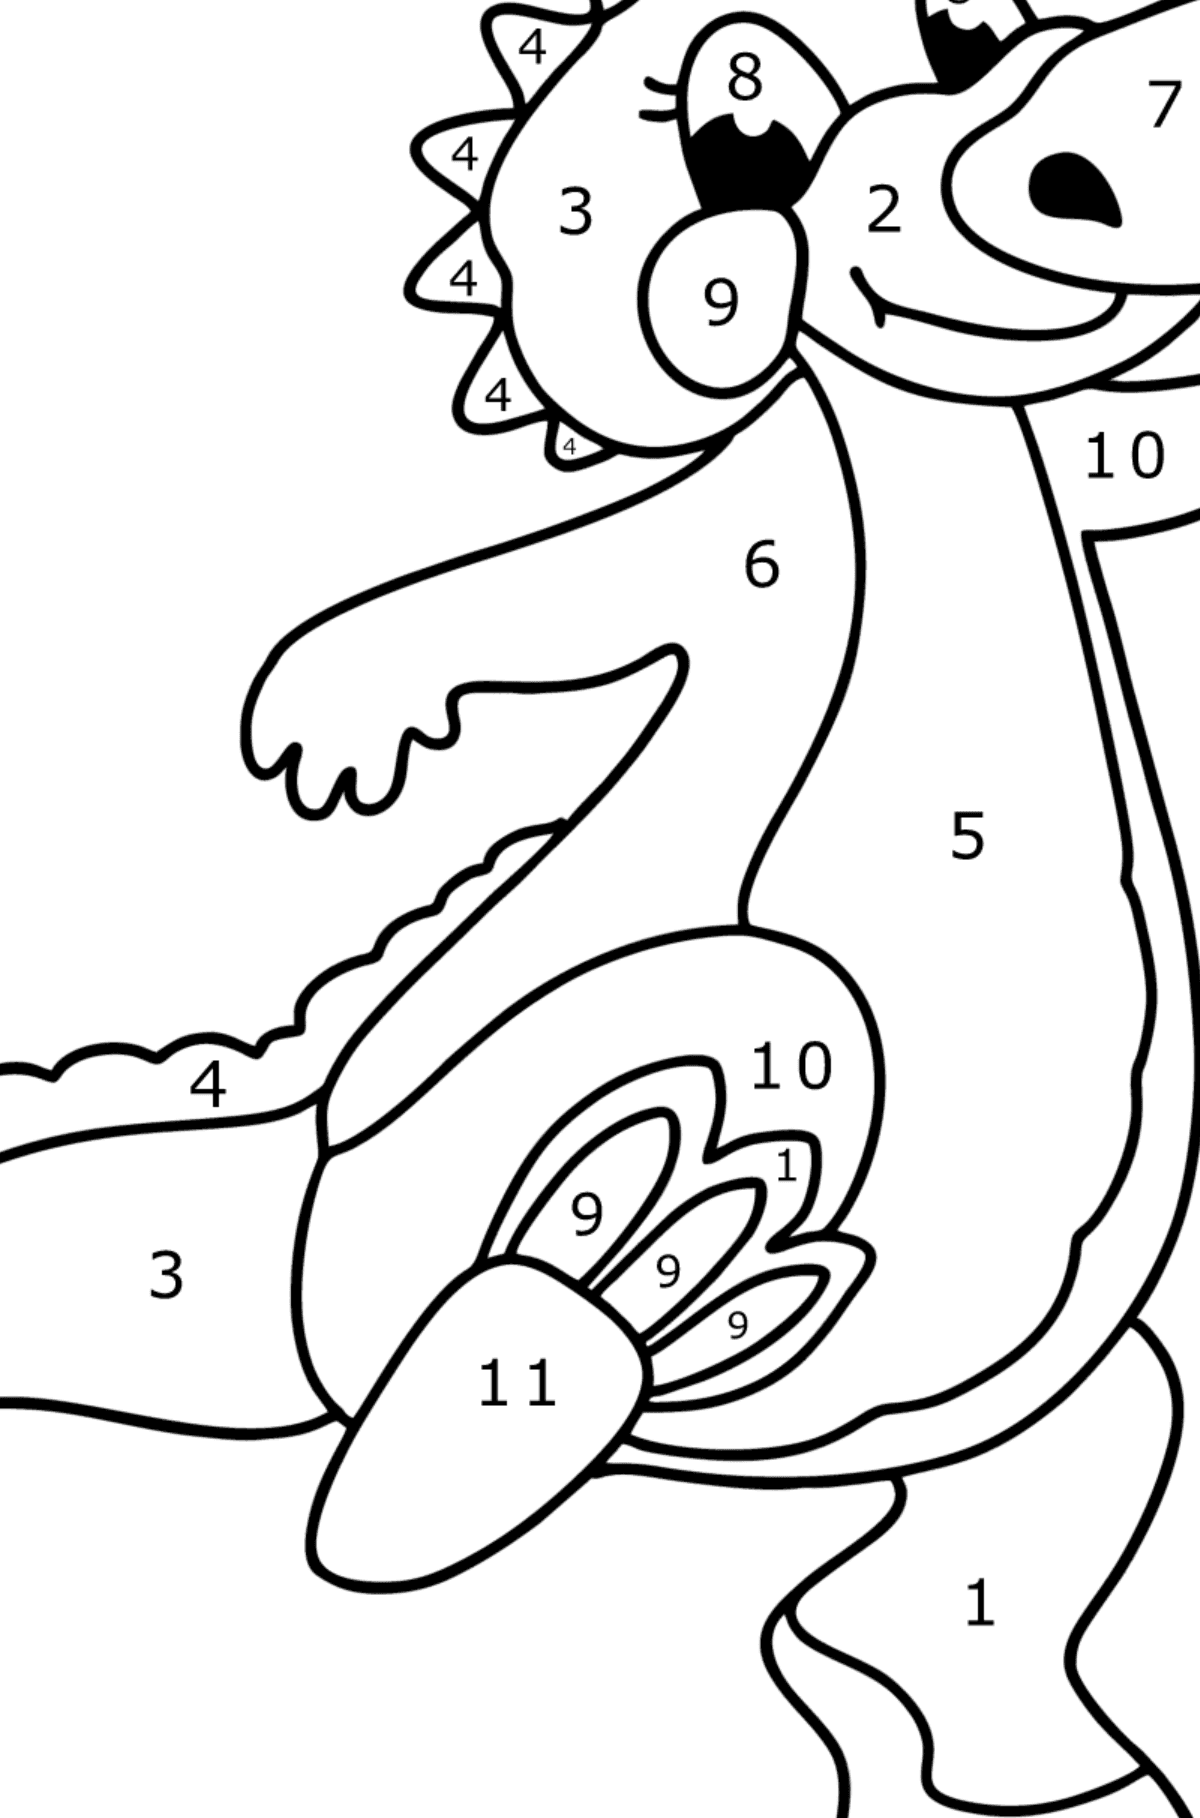 Happy dragon baby coloring page - Coloring by Numbers for Kids